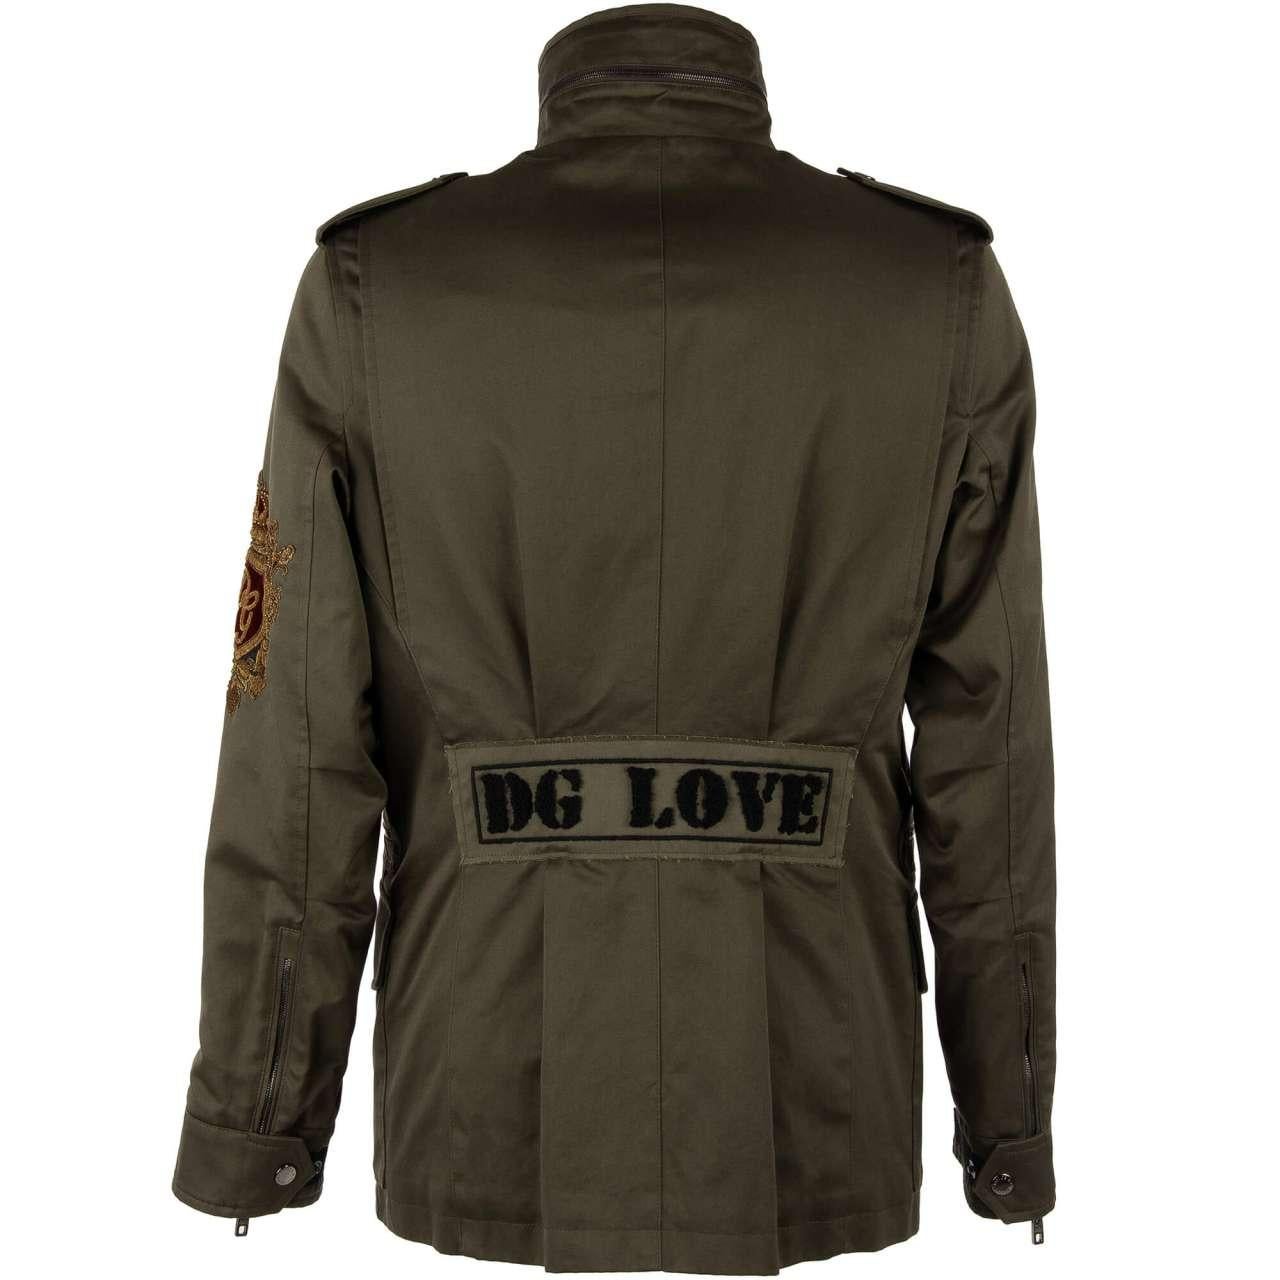 - Military Canvas Parka Jacket DG LOVE with patches, pockets, hidden hoody and a large embroidered logo crown at the sleeve by DOLCE & GABBANA - Former RRP: EUR 2.450 - New with tag - Slim Fit - MADE IN ITALY - Model: G9OC9Z-FU6VK-V4655 - Material: